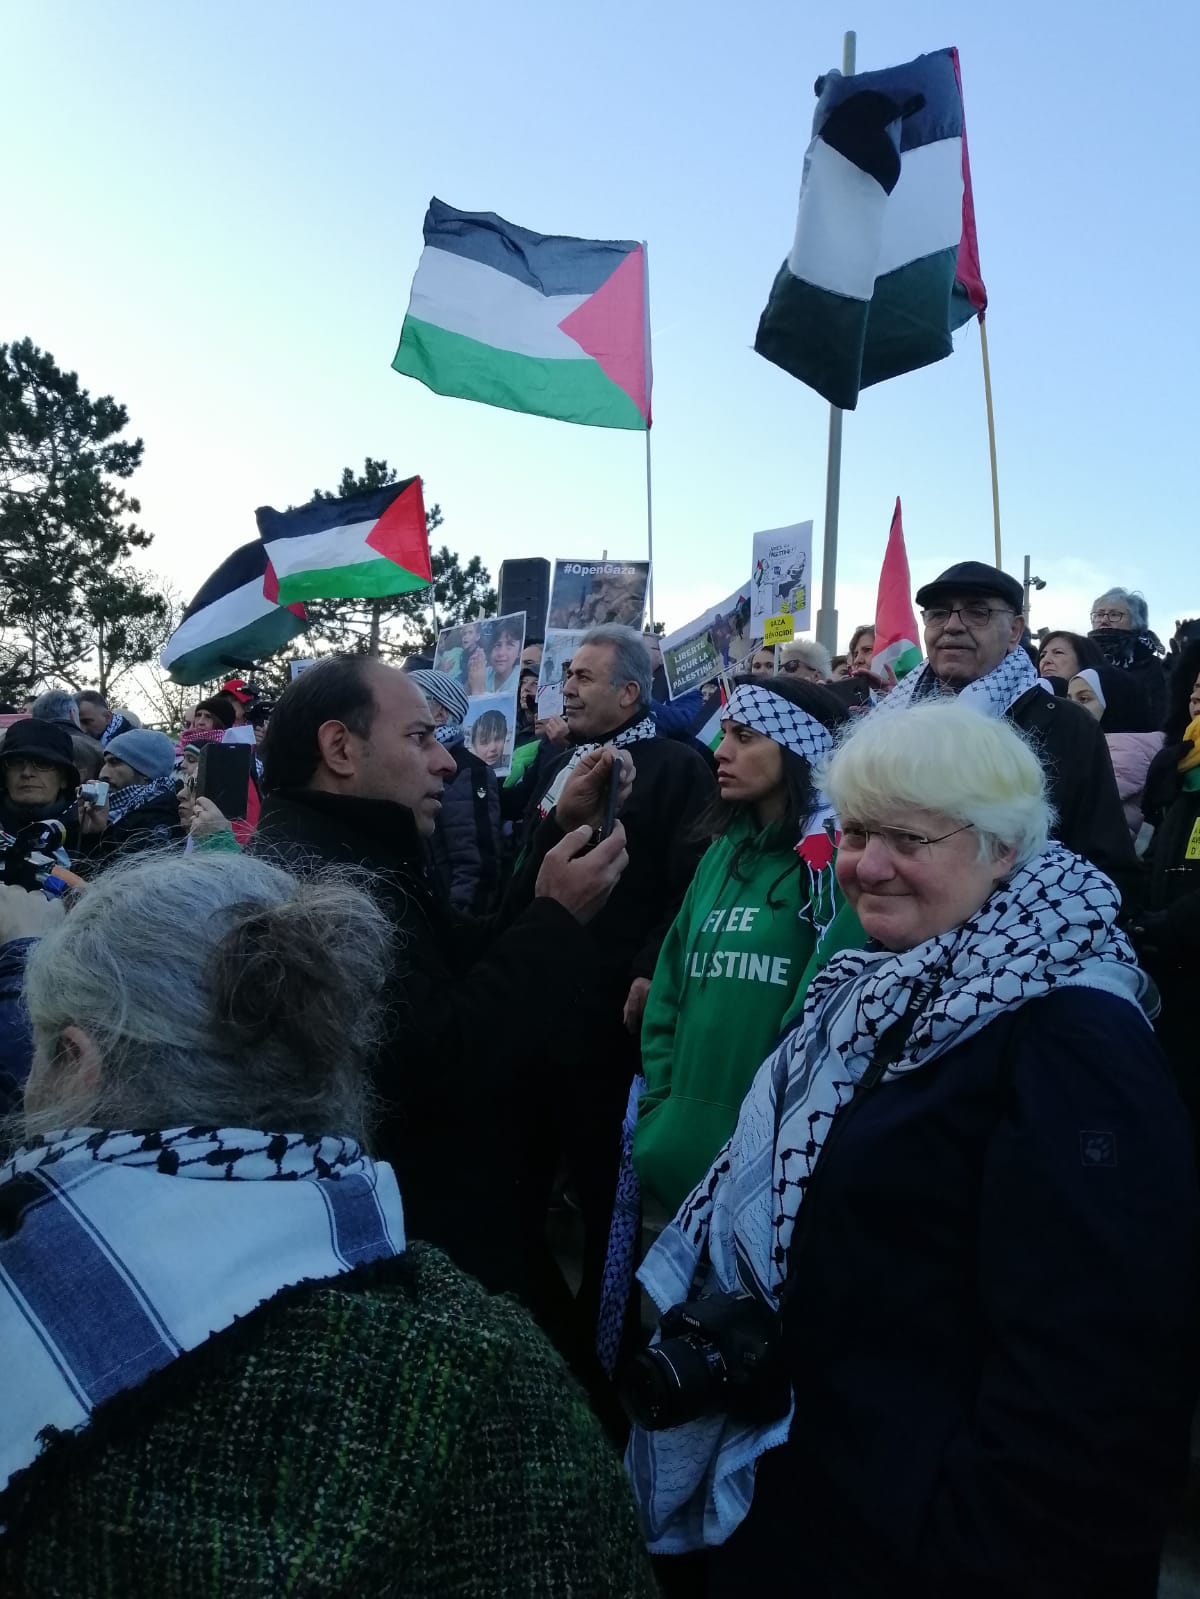 Palestinian community in Denmark rally to show support for Lebanon after Beirut explosion